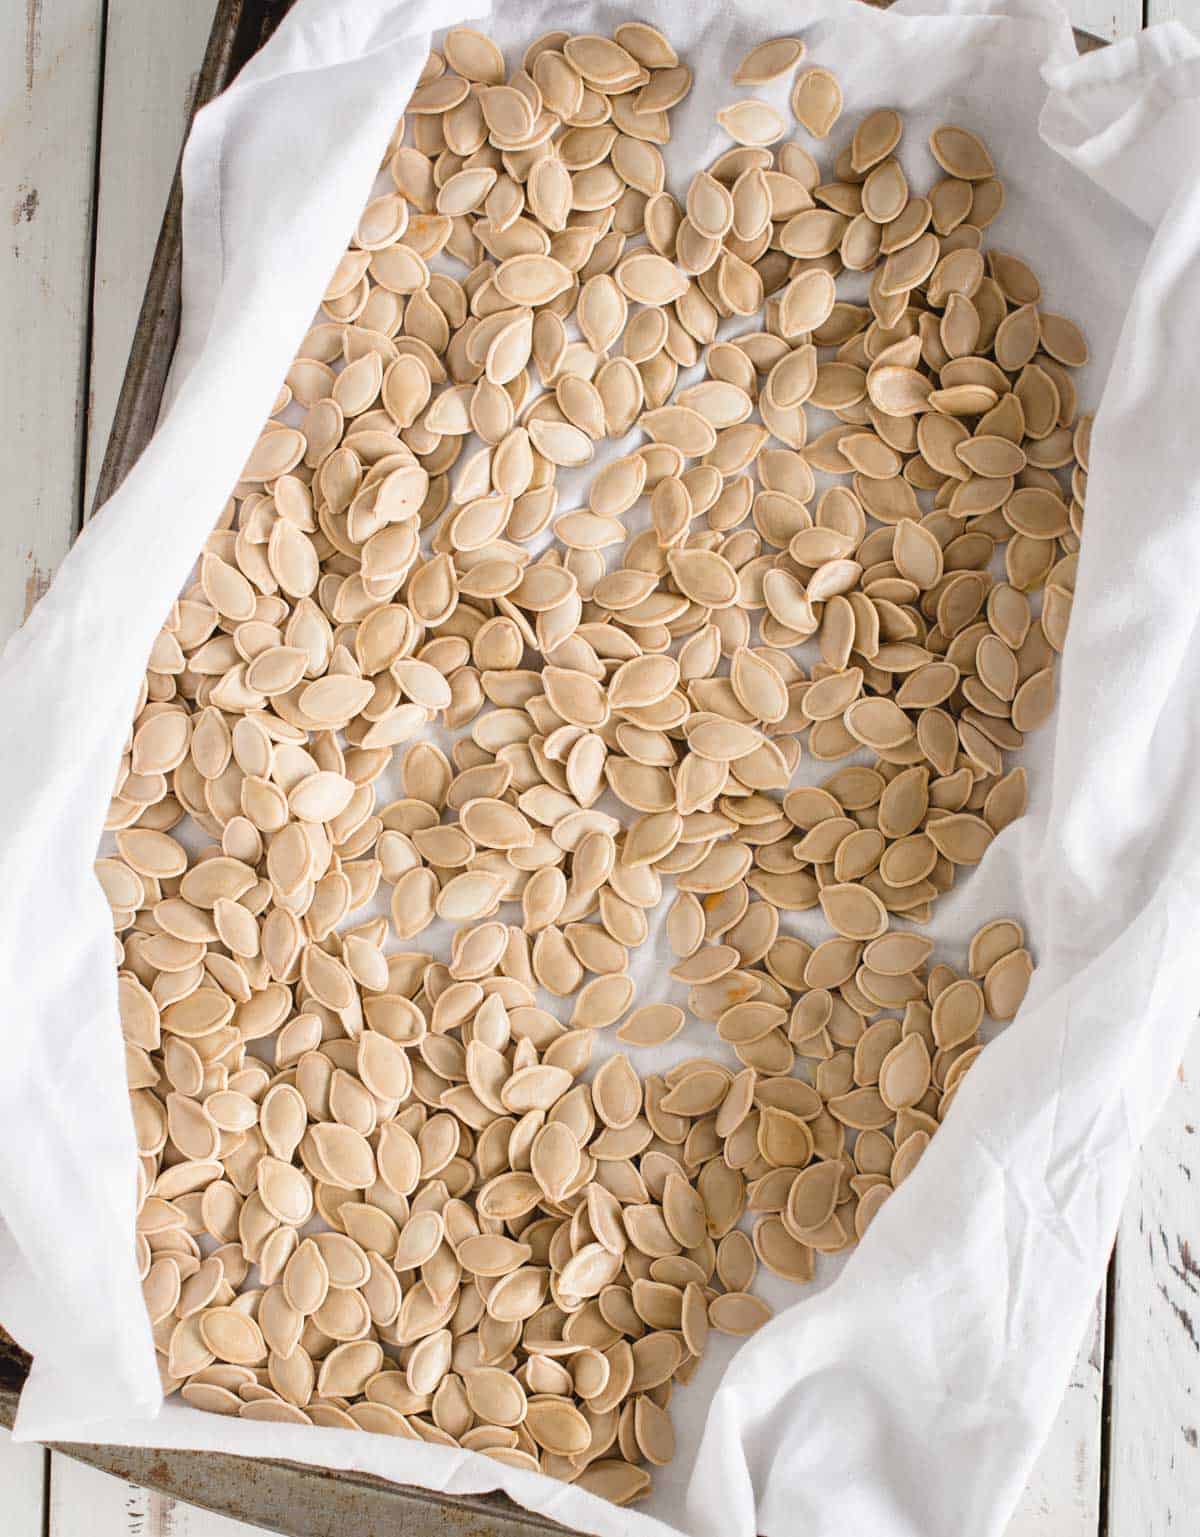 raw pumpkin seeds drying on a kitchen towel